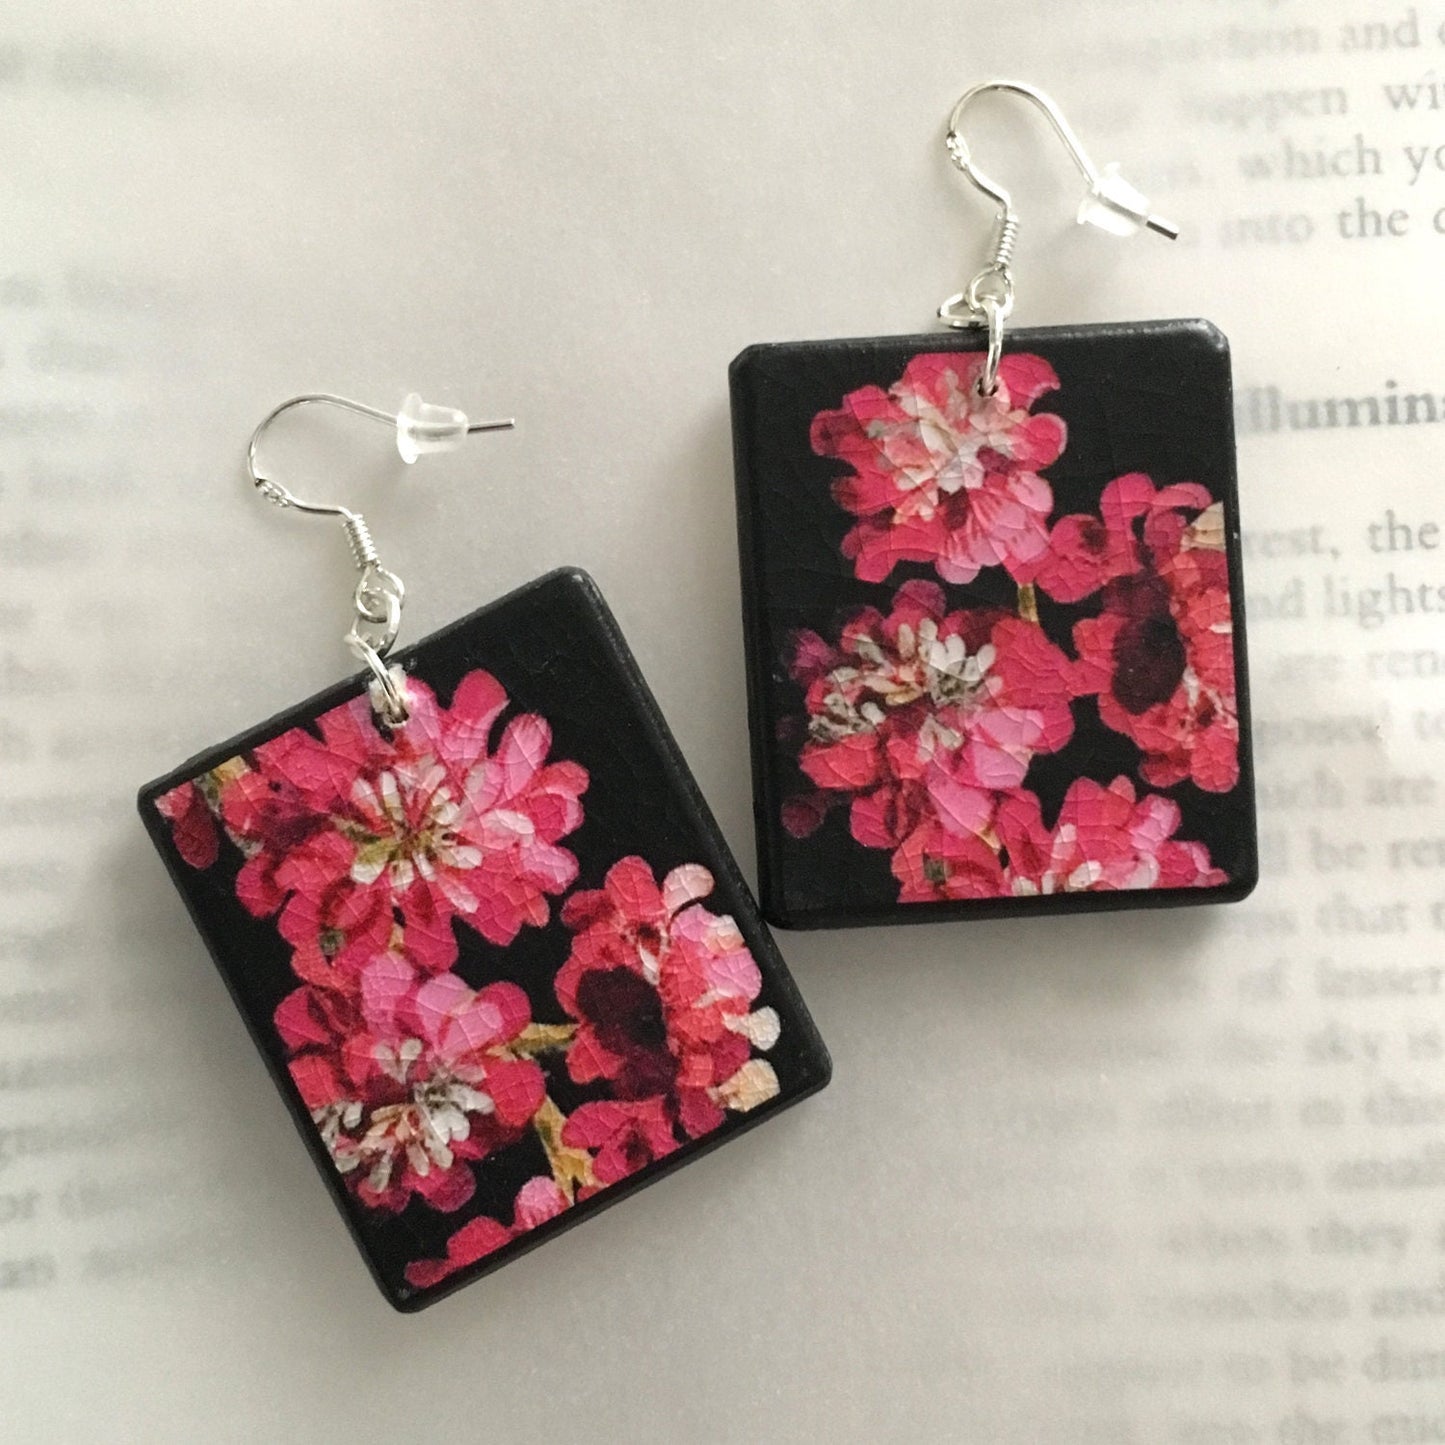 Mary Delany, fuchsia floral earrings on sustainable wood. Mismatched art earrings with hypoallergenic hook in 925 sterling silver, quirky earrings light to wear.